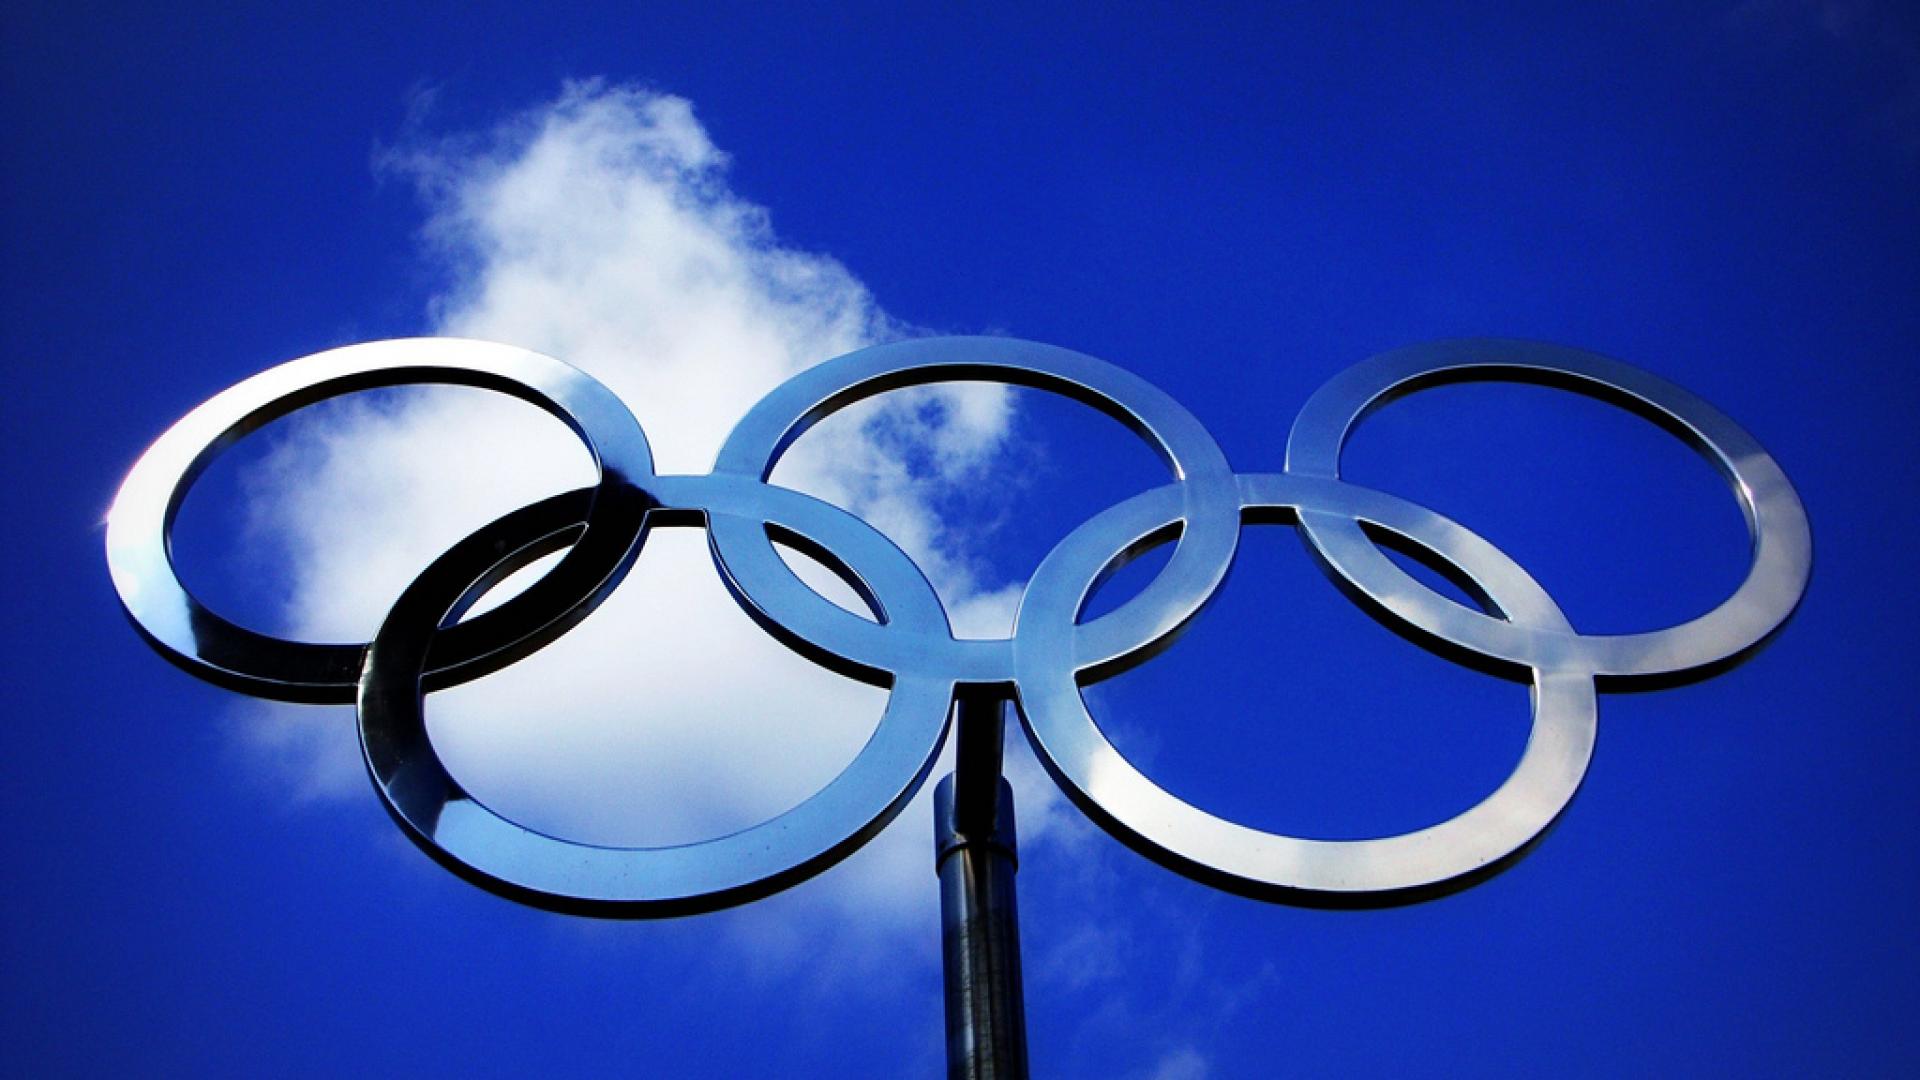 Olympic rings against the sky